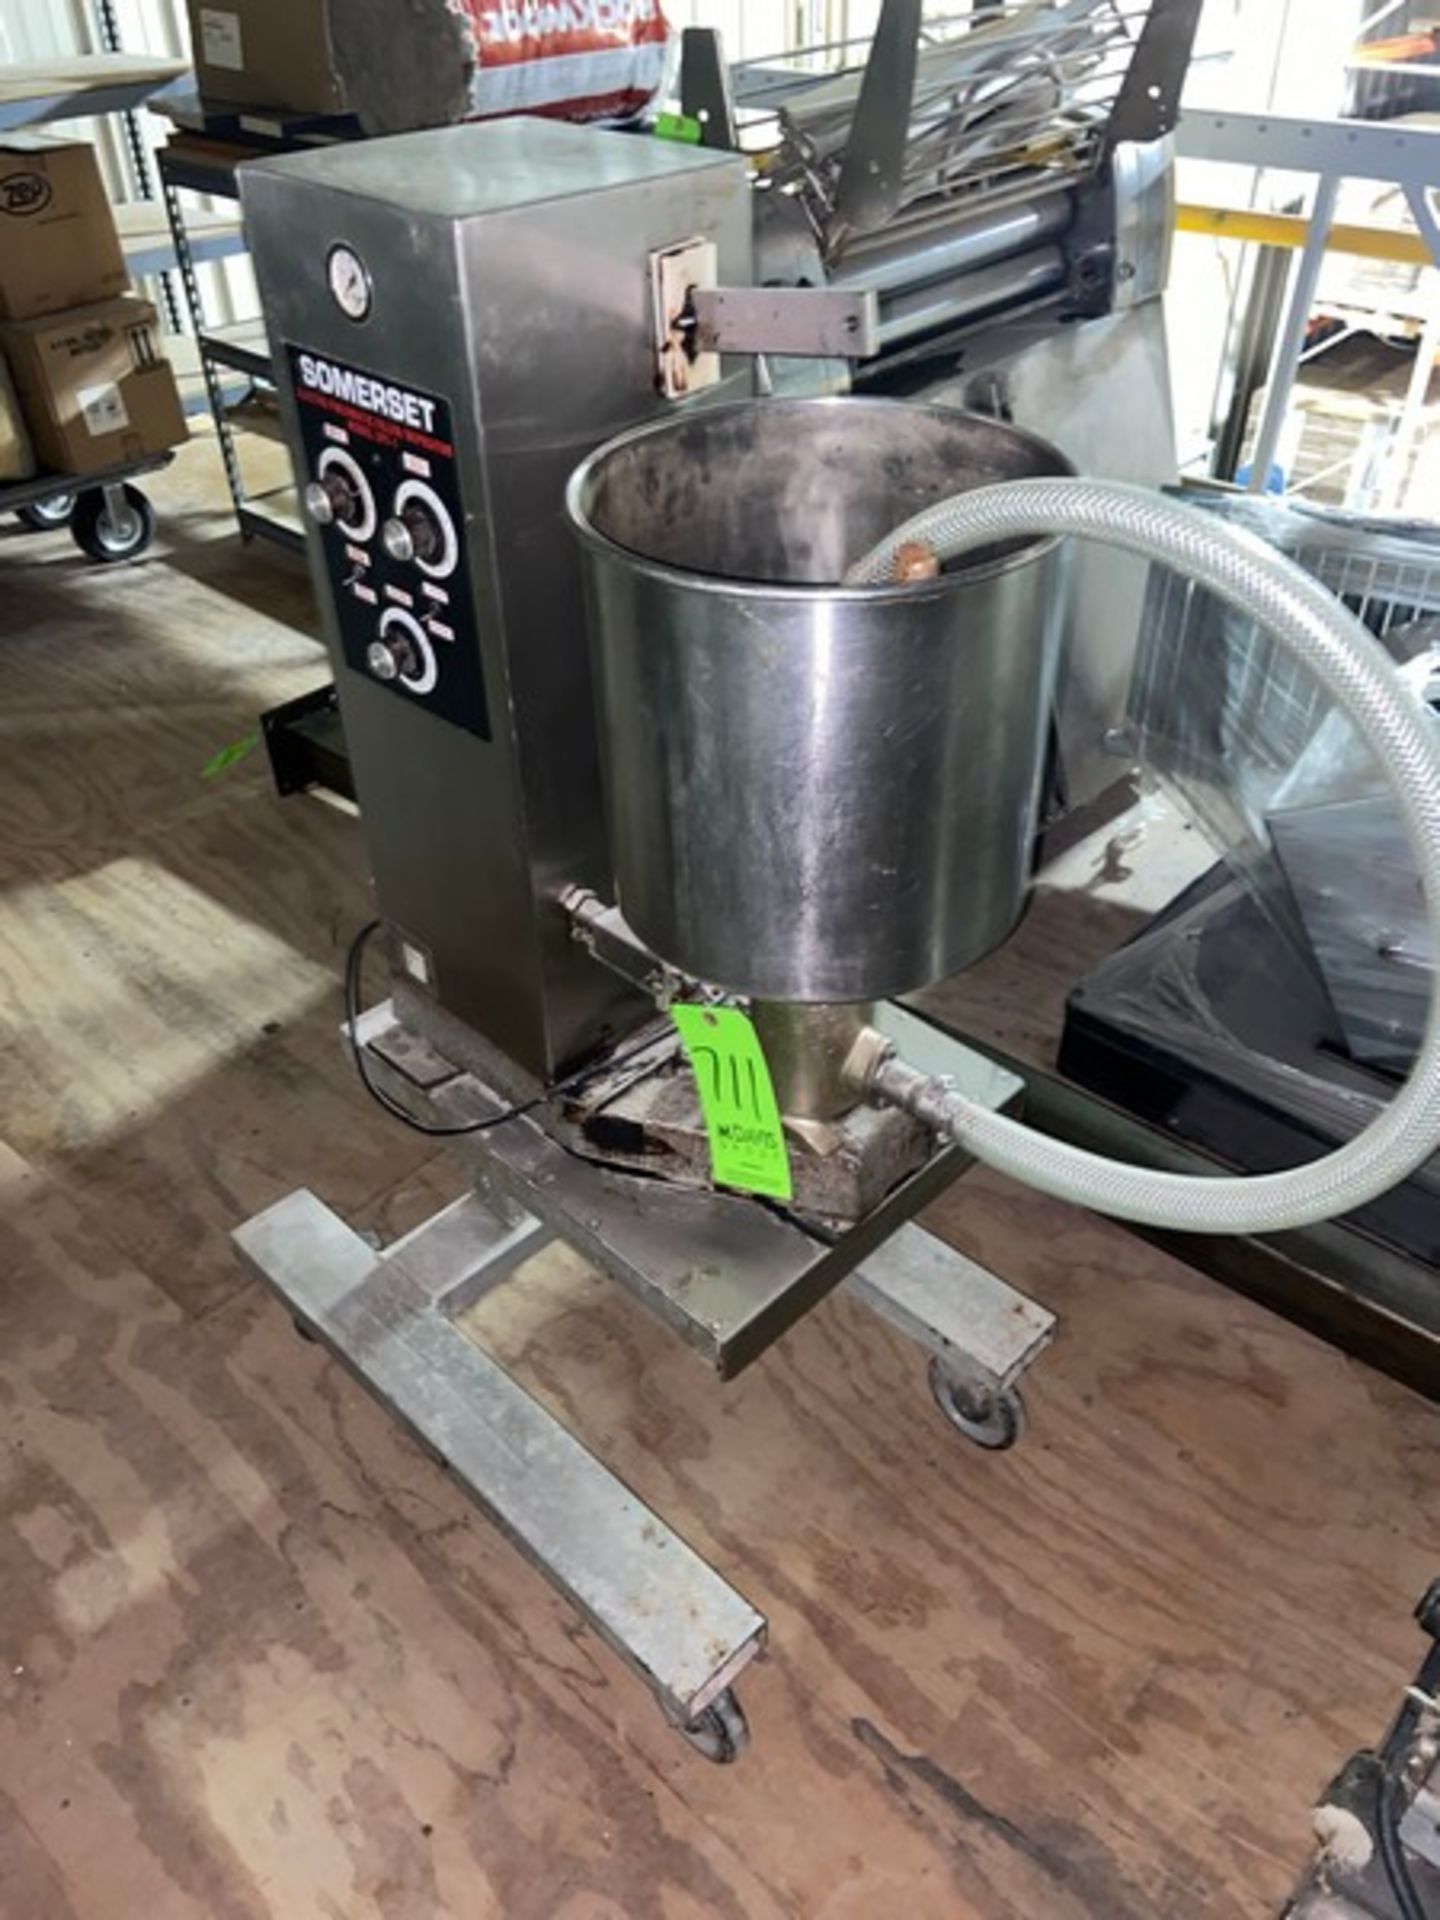 SOMERSET S/S ELECTRO PNEUMATIC FILLER/DEPOSITOR, M/N EPF-1, WITH S/S BOWL, MOUNTED ON PORTABLE FRAME